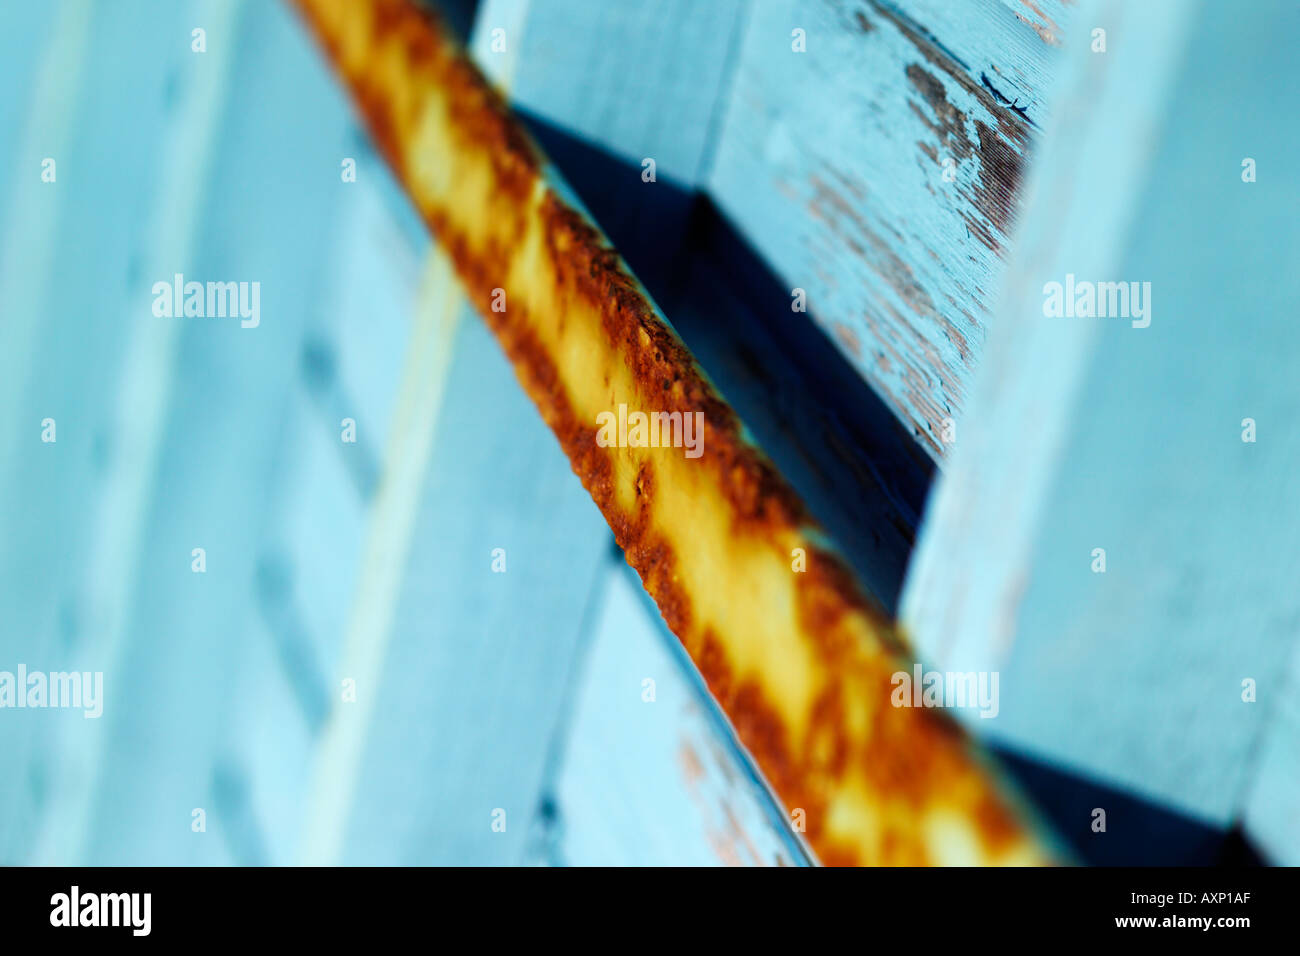 Abstract view of a rusty bar on a beach hut Stock Photo